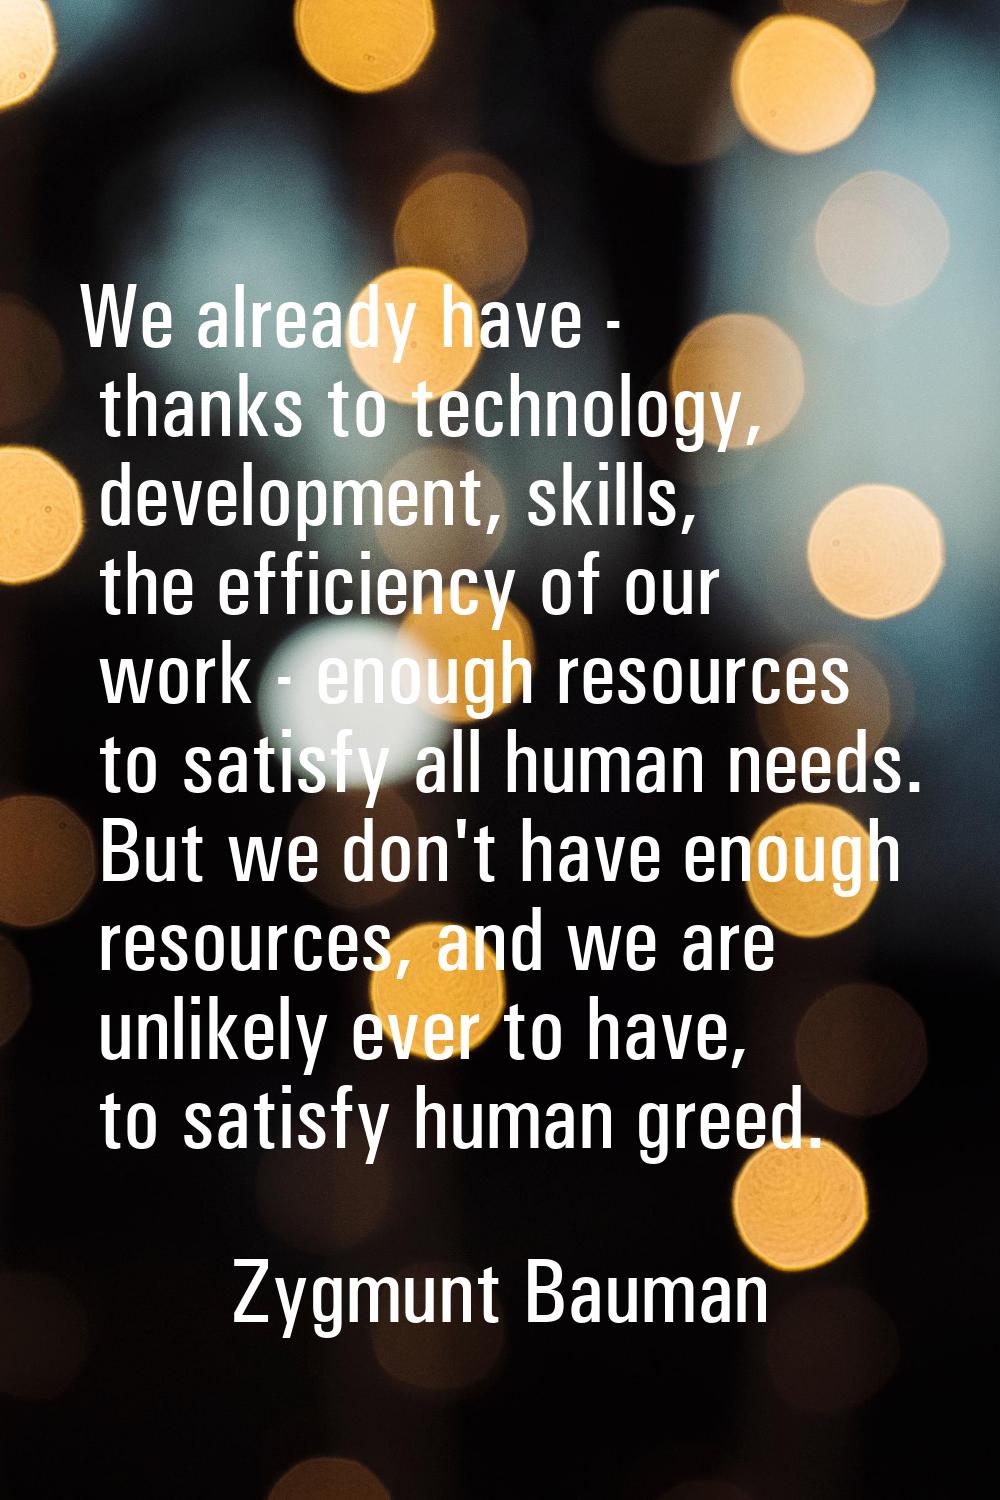 We already have - thanks to technology, development, skills, the efficiency of our work - enough re